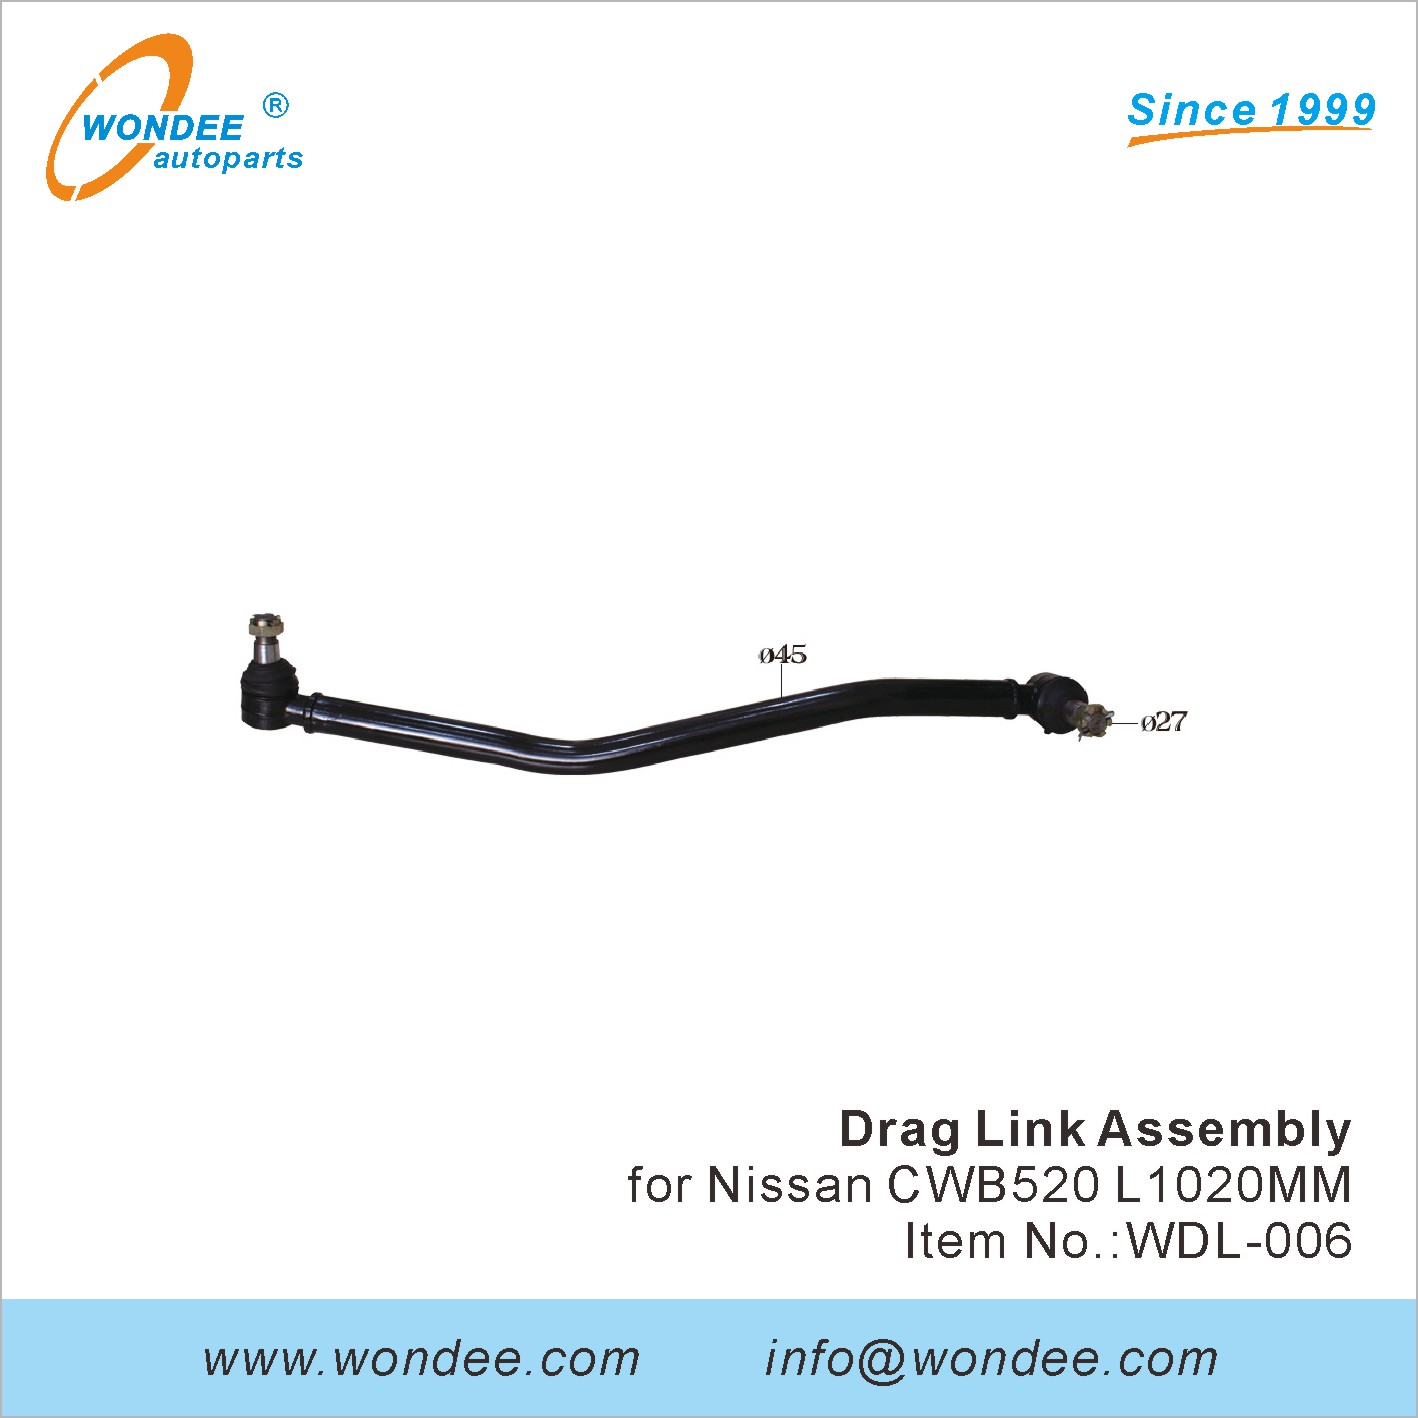 WONDEE drag link assembly (6)